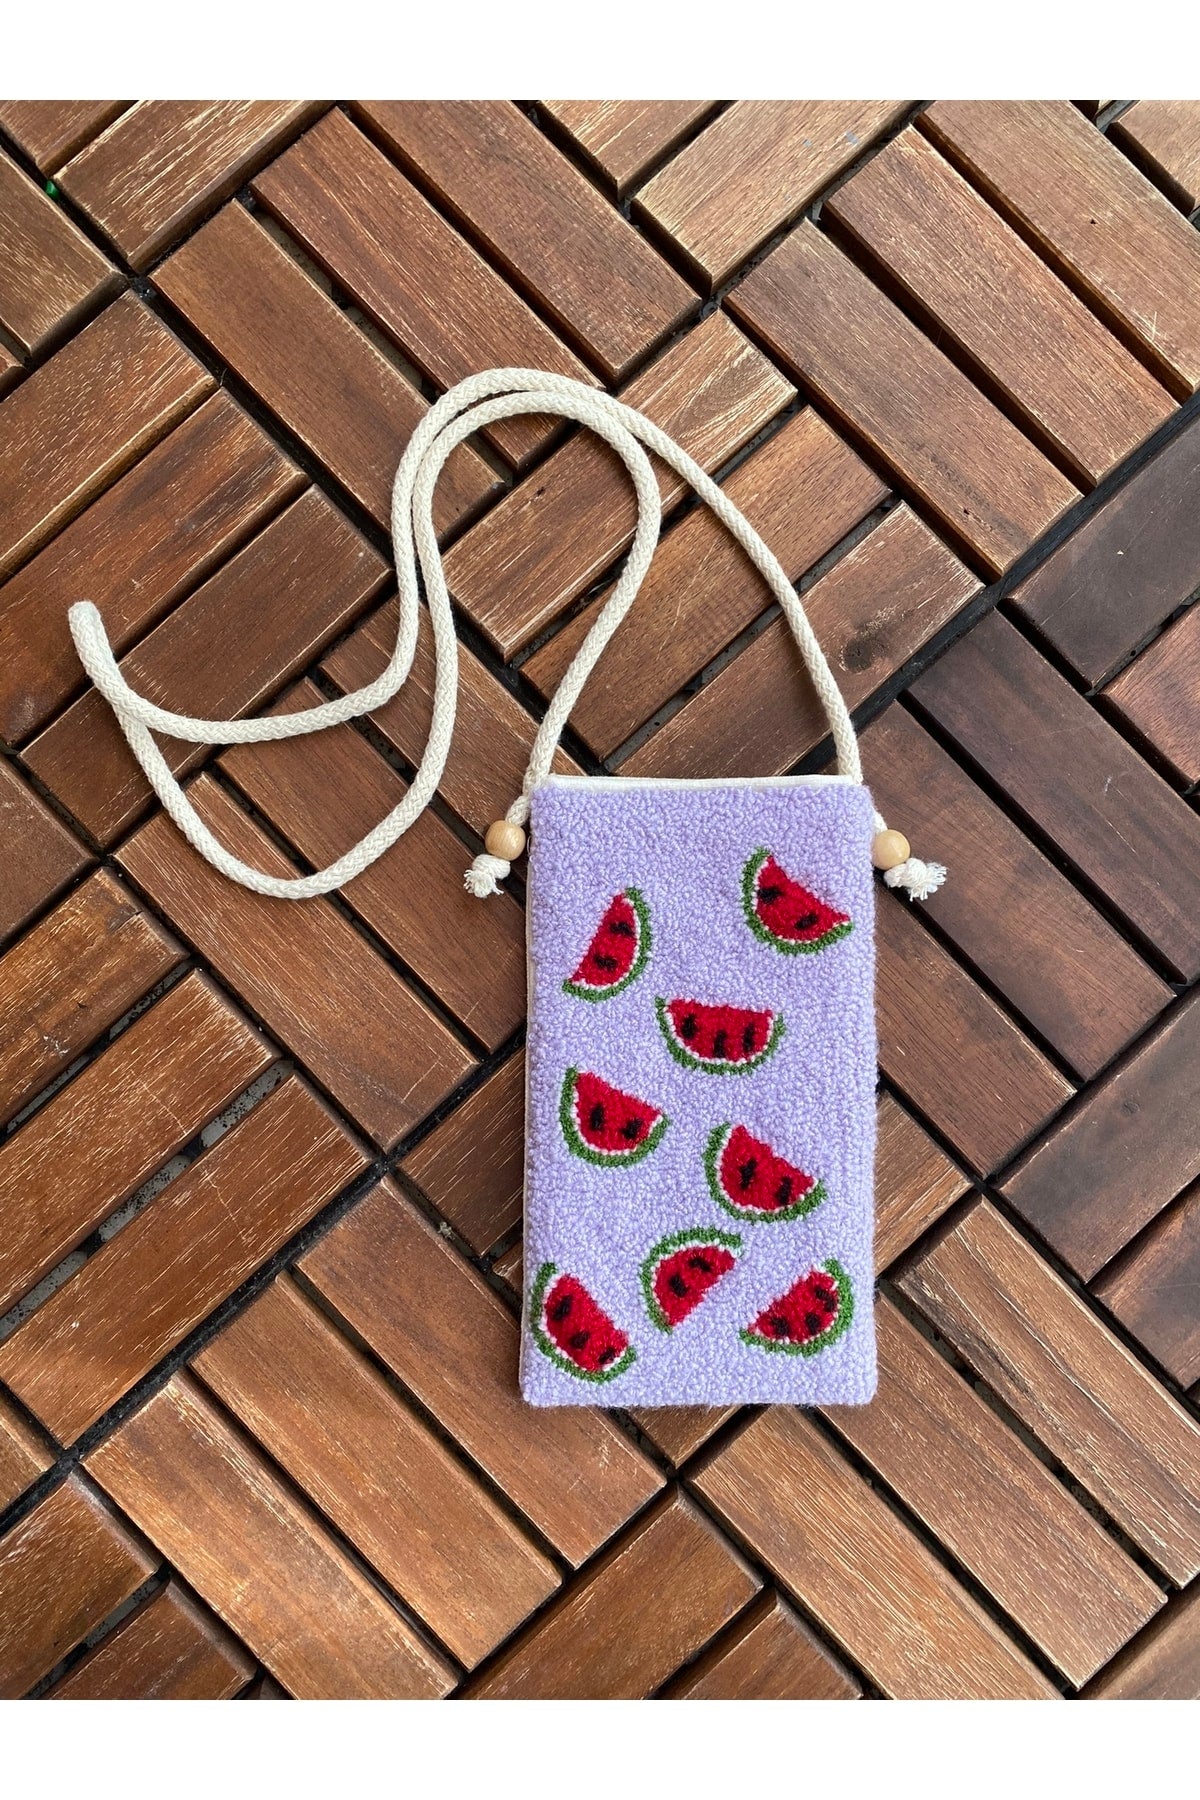 Punch Embroidery Phone Bag - Watermelon Pattern